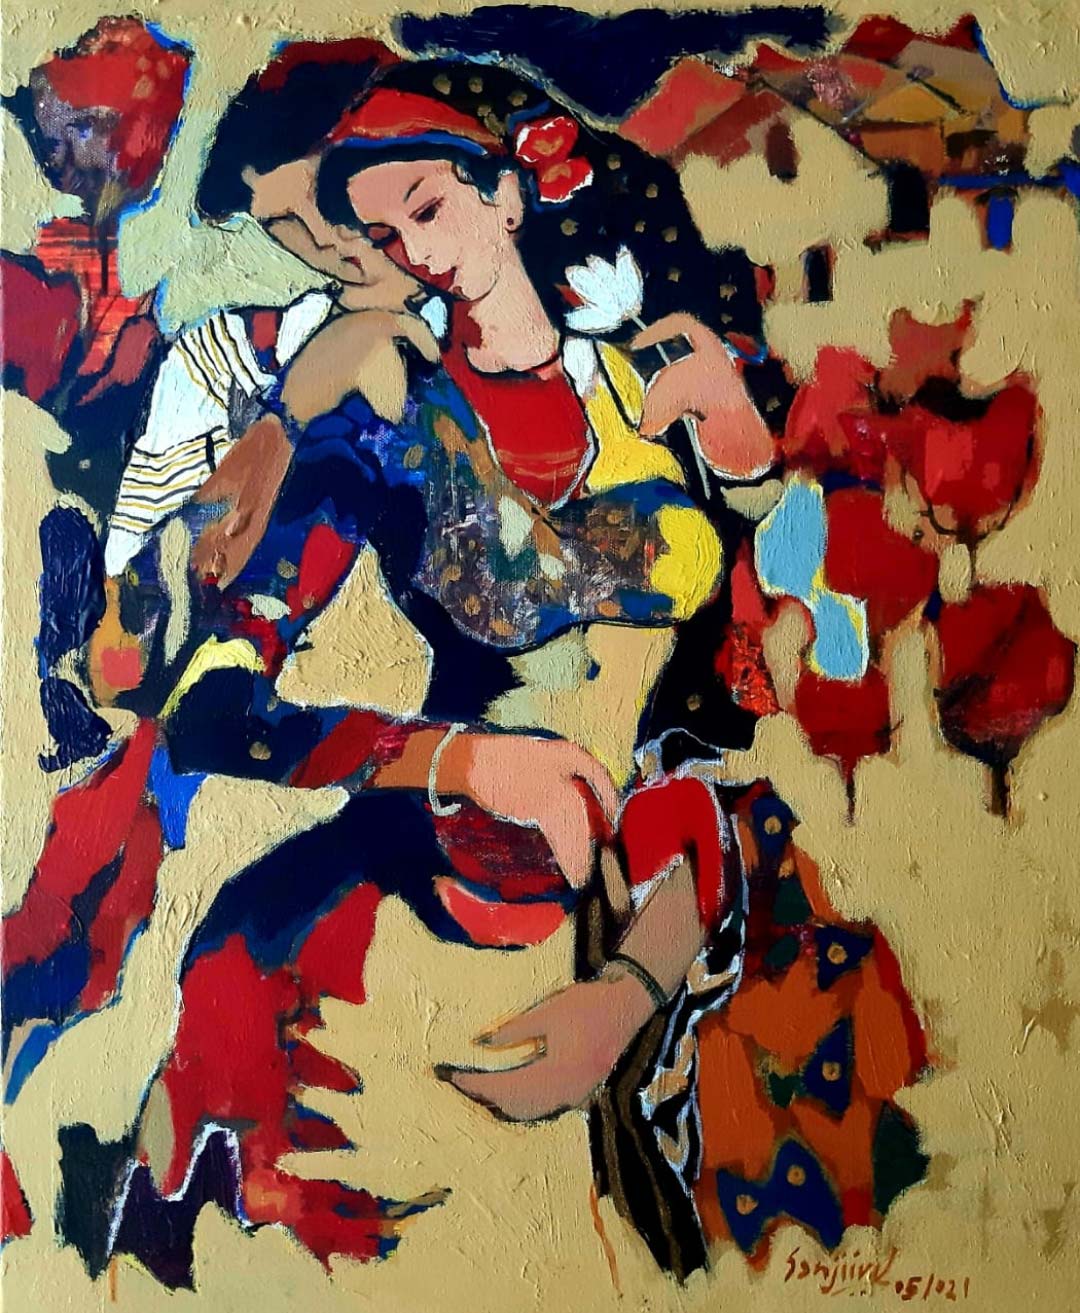 Figurative Painting with Acrylic on Canvas "Untitled-1" art by Sanjiv Sankkpal